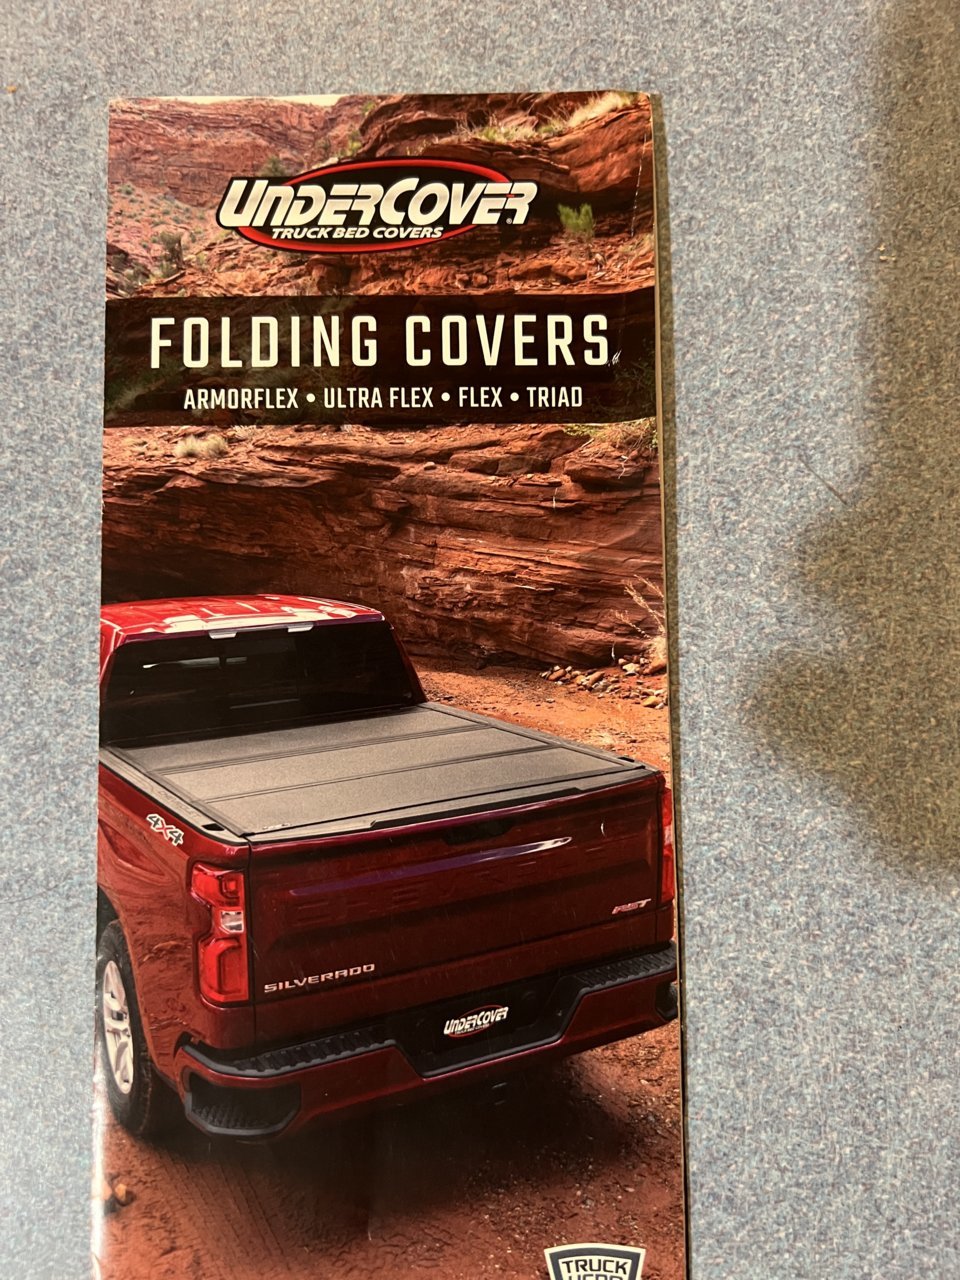 IMG_4065_undercover_truck_bed_covers.jpg